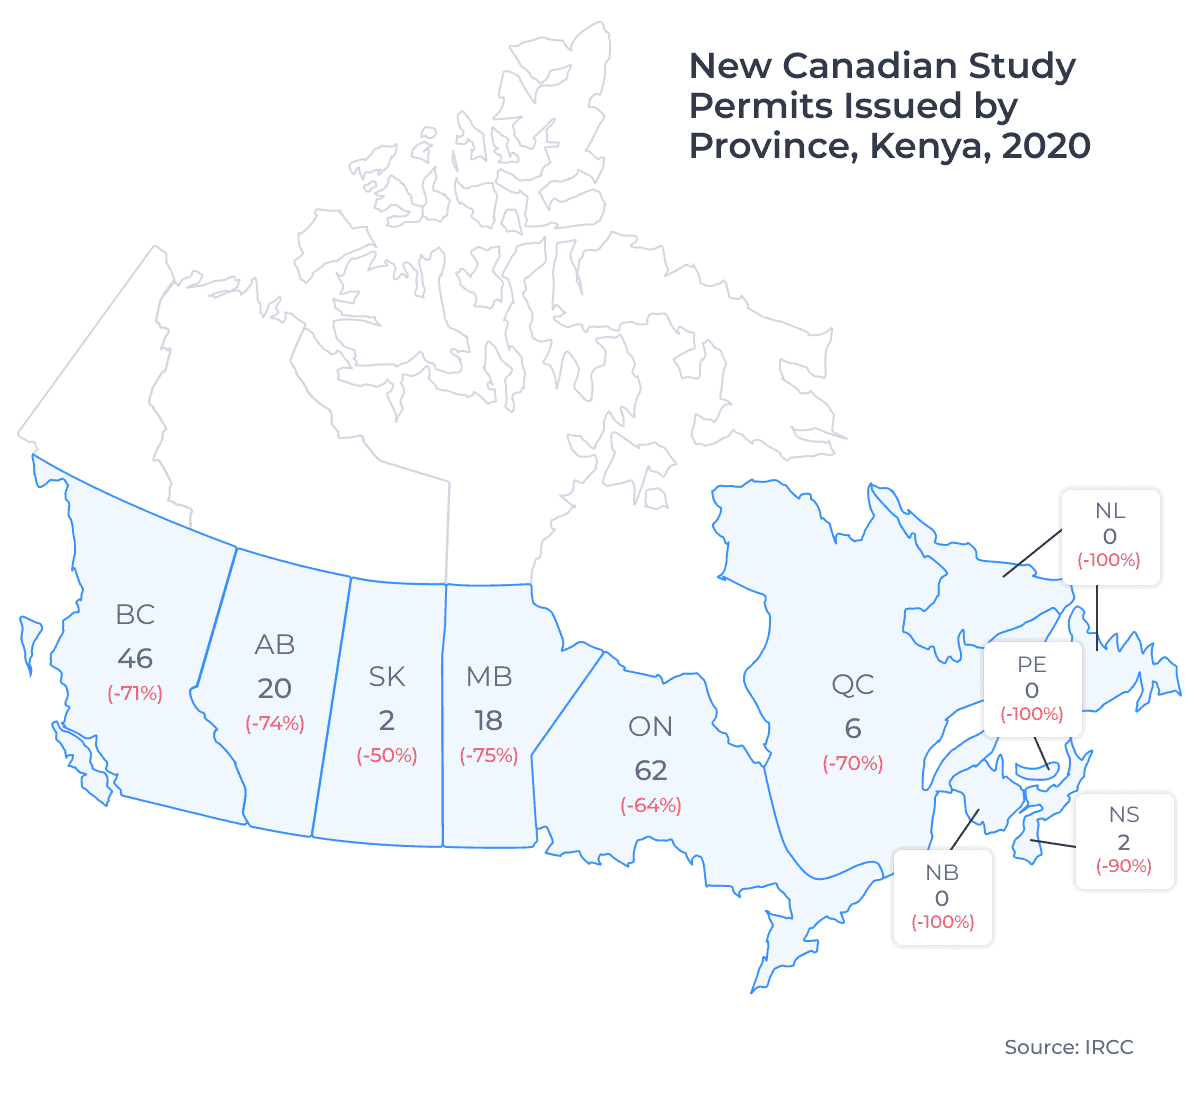 New Canadian Study Permits Issued by Province, Kenya, 2020